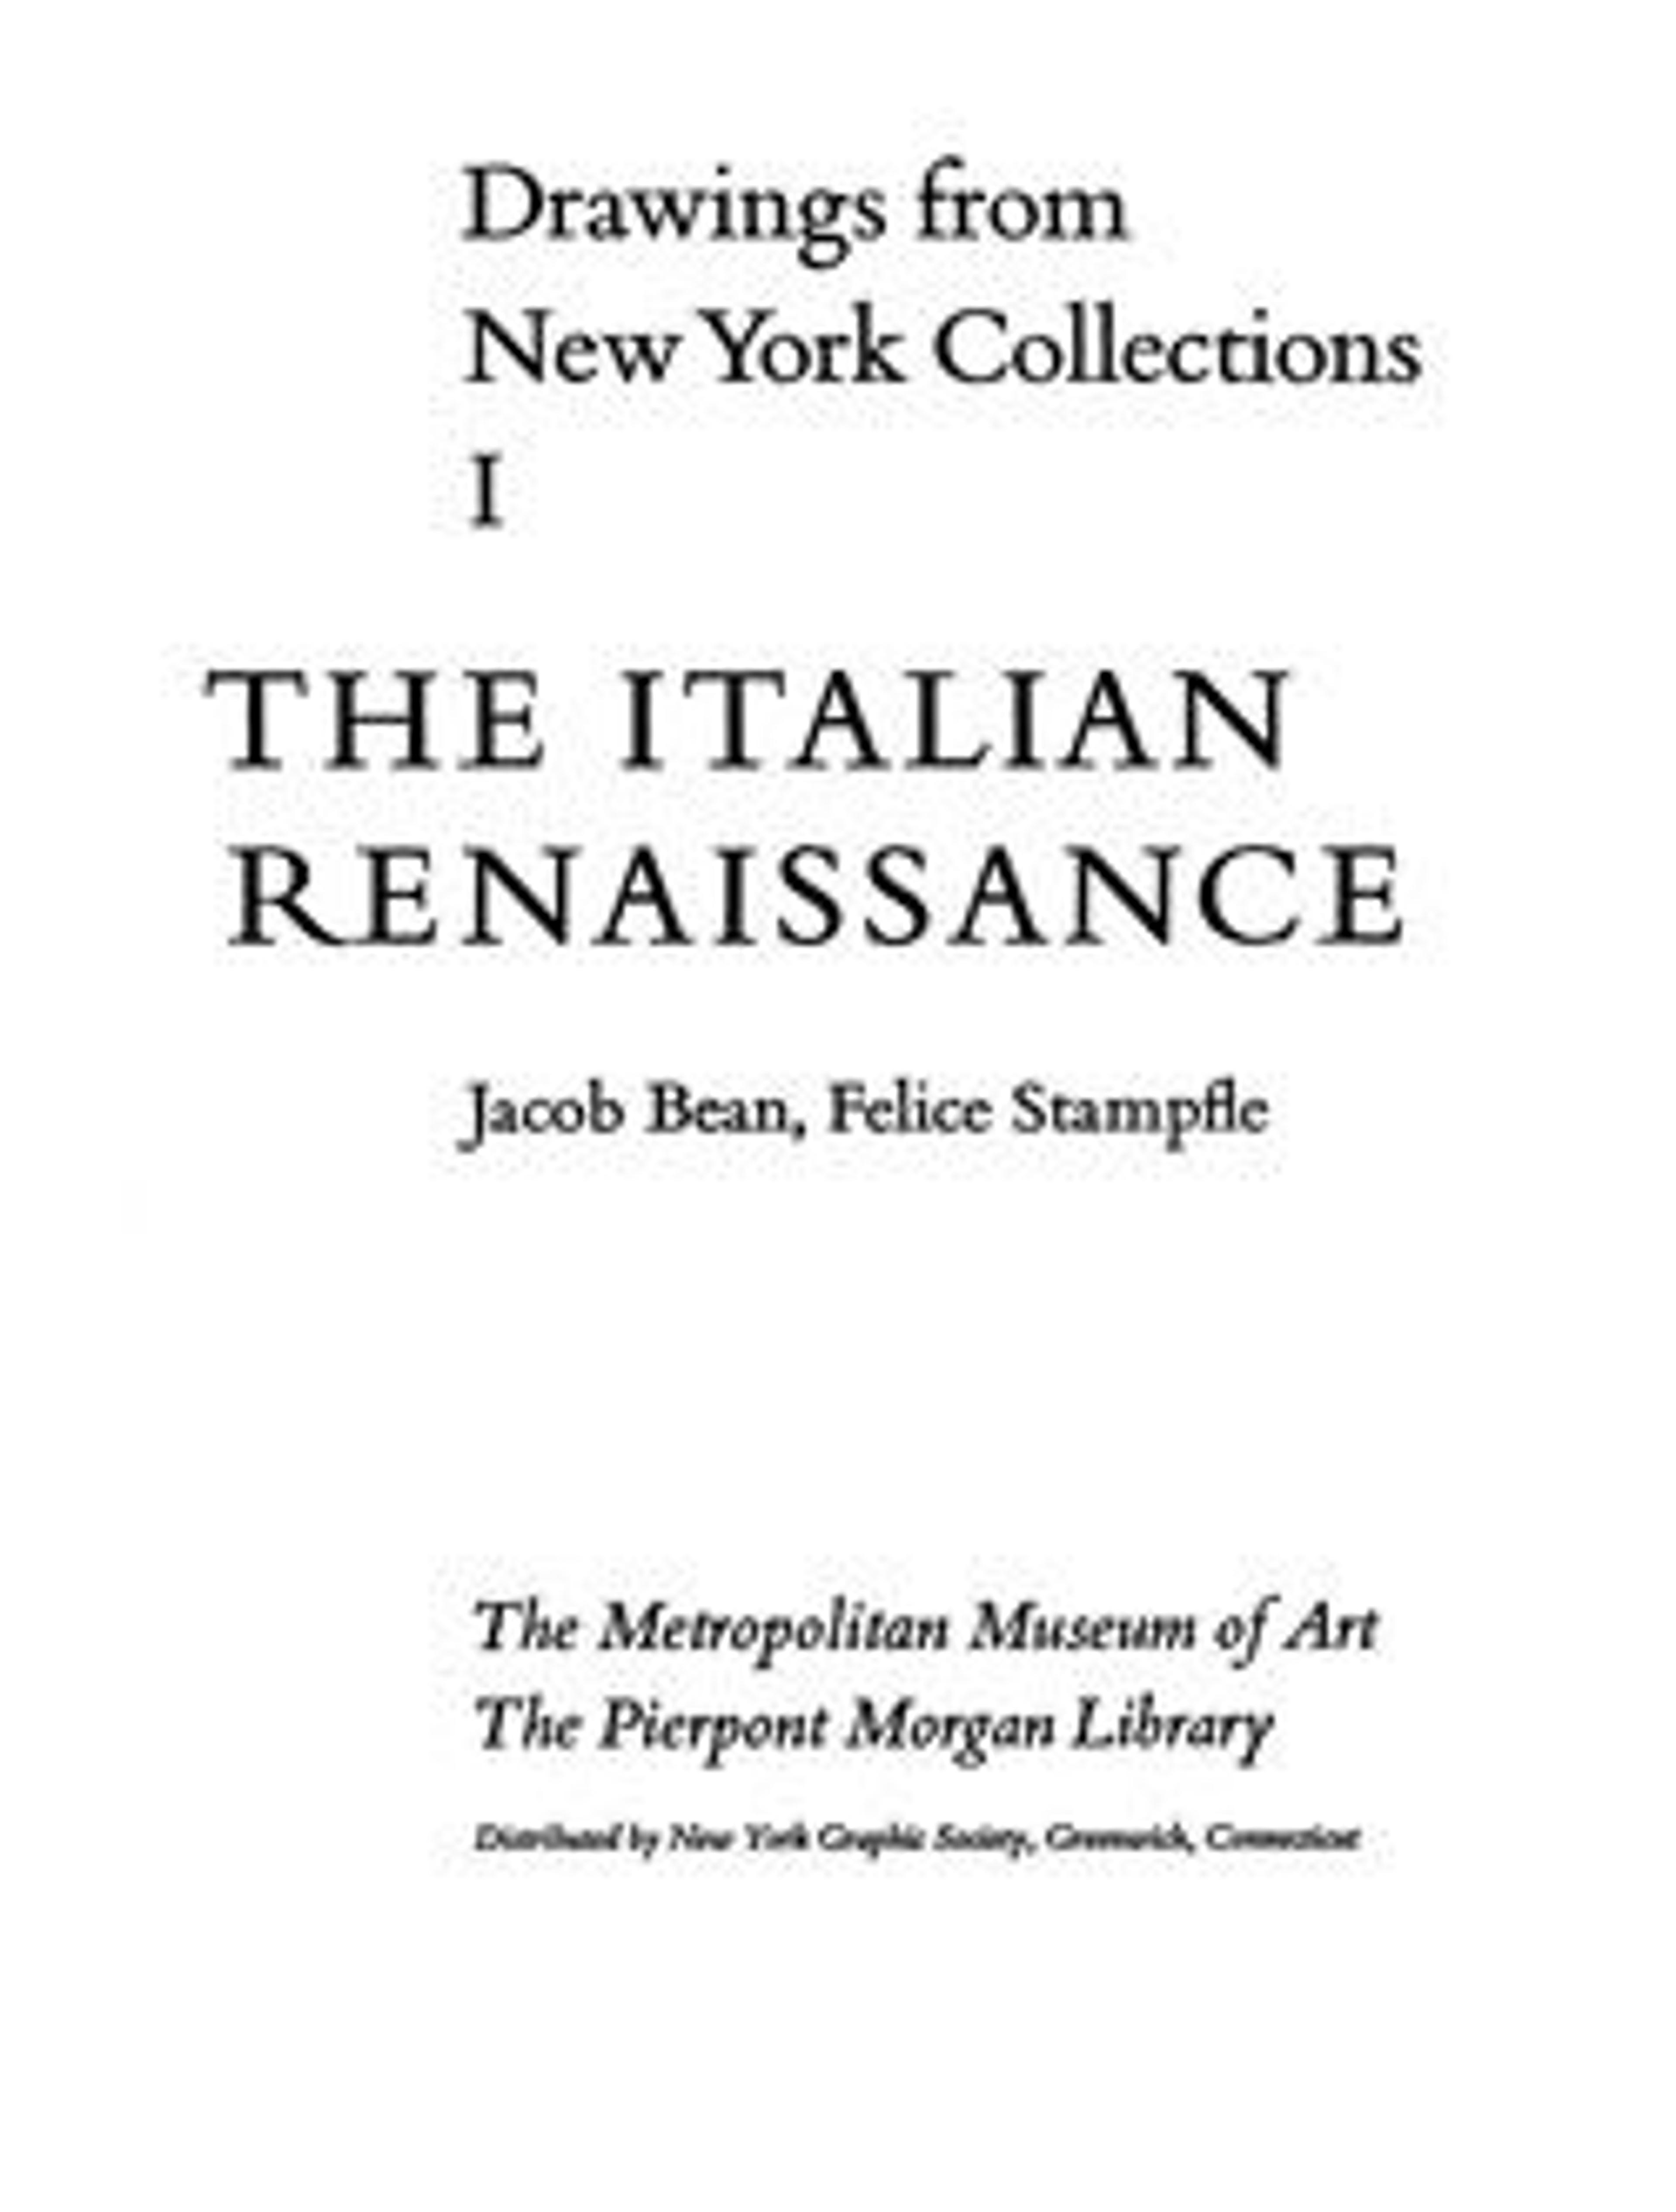 Drawings from New York Collections, Vol. 1: The Italian Renaissance